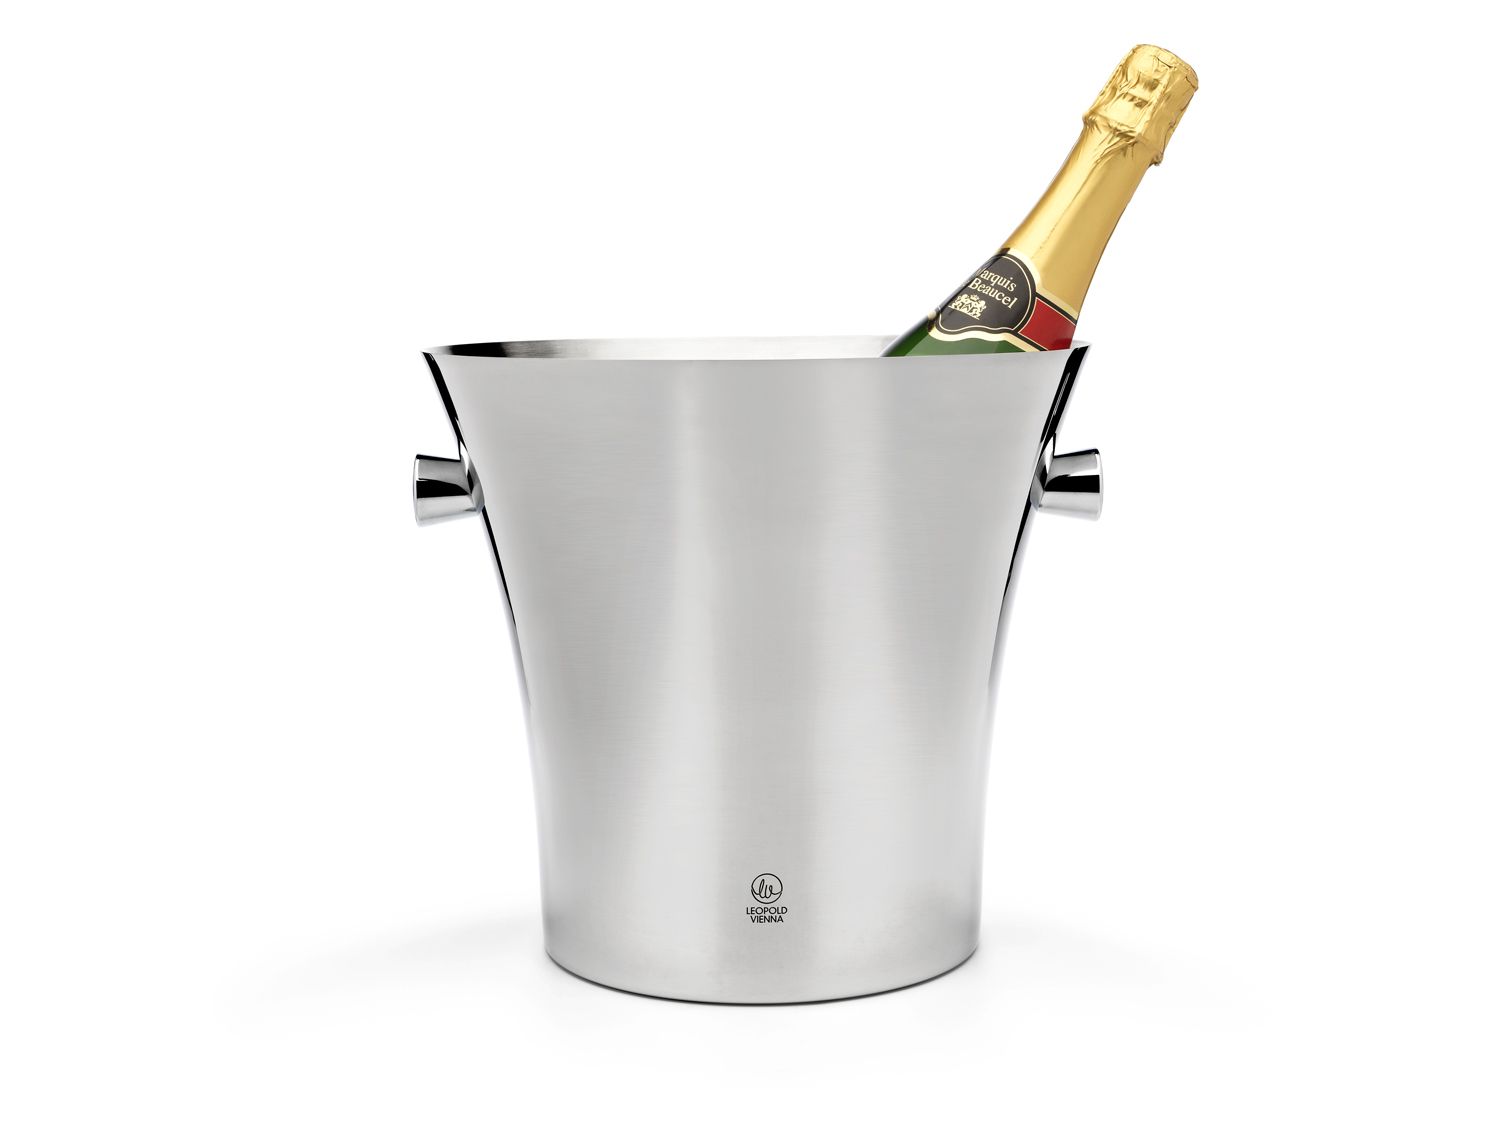 Champagne cooler single walled with grips, stainless steel